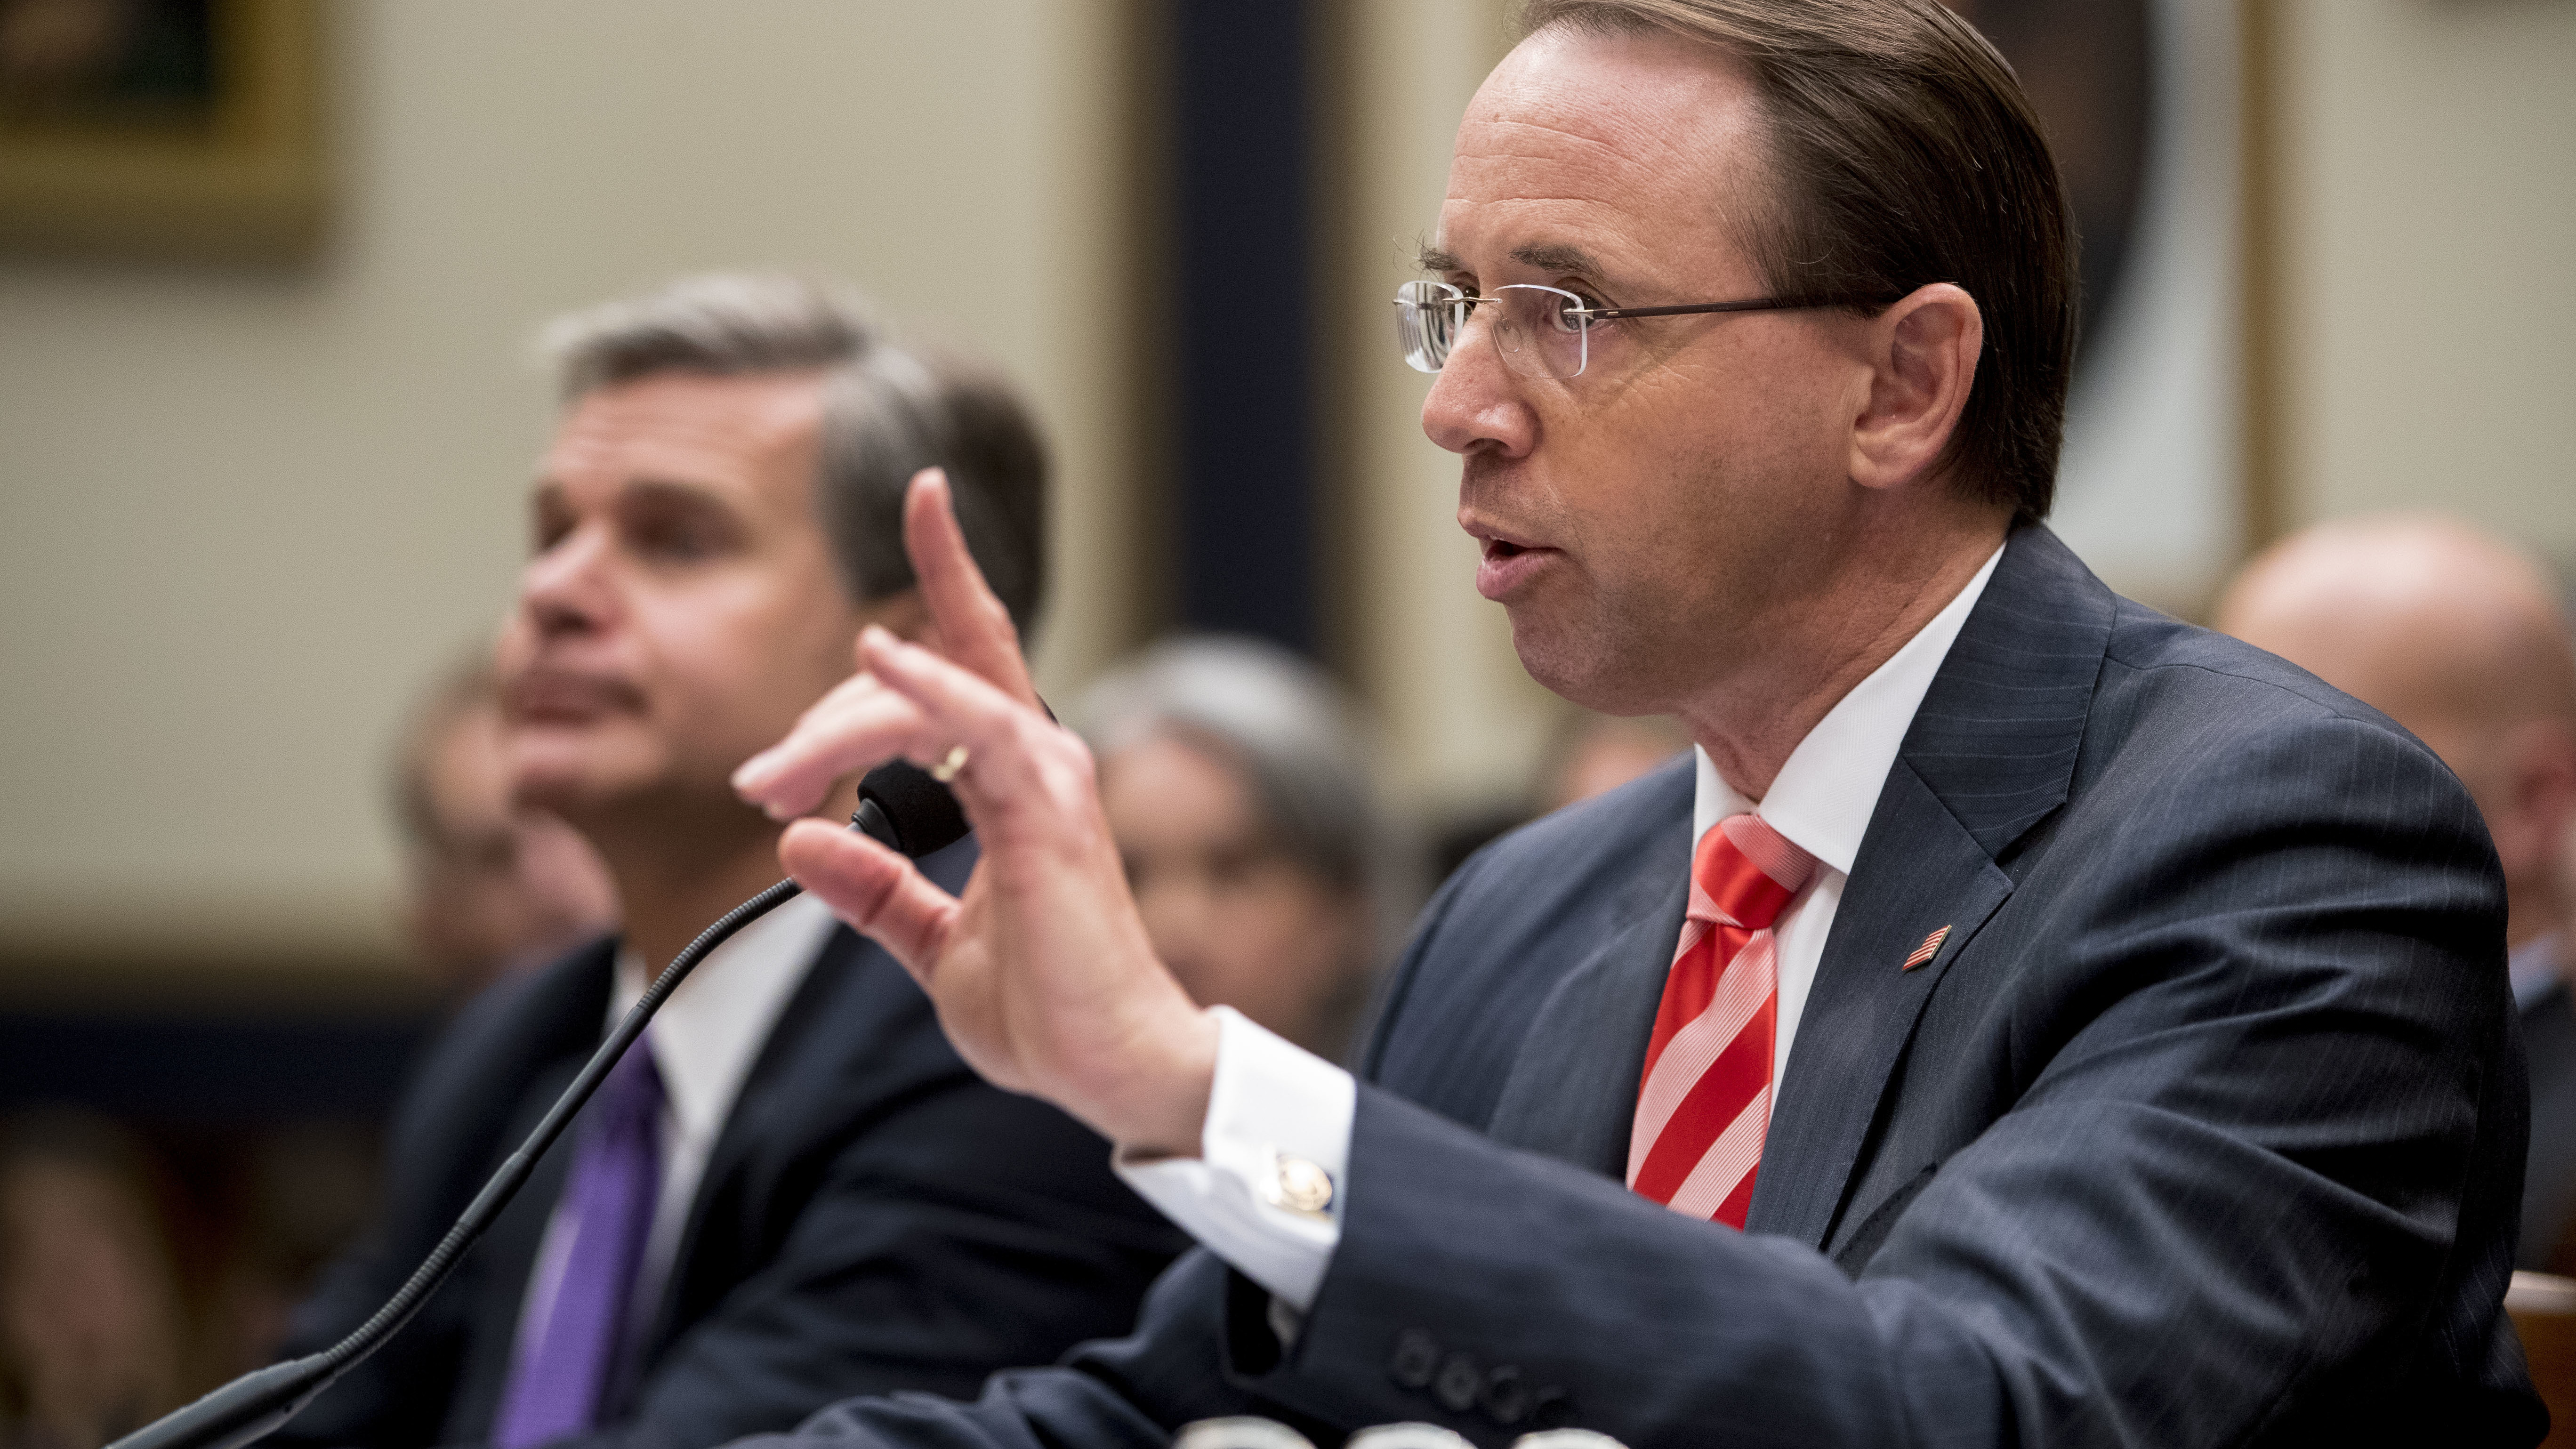 Deputy Attorney General Rod Rosenstein told lawmakers Thursday that he objected to personal attacks about purported Justice Department stonewalling on the Russia investigation. With him is FBI Director Christopher Wray.
